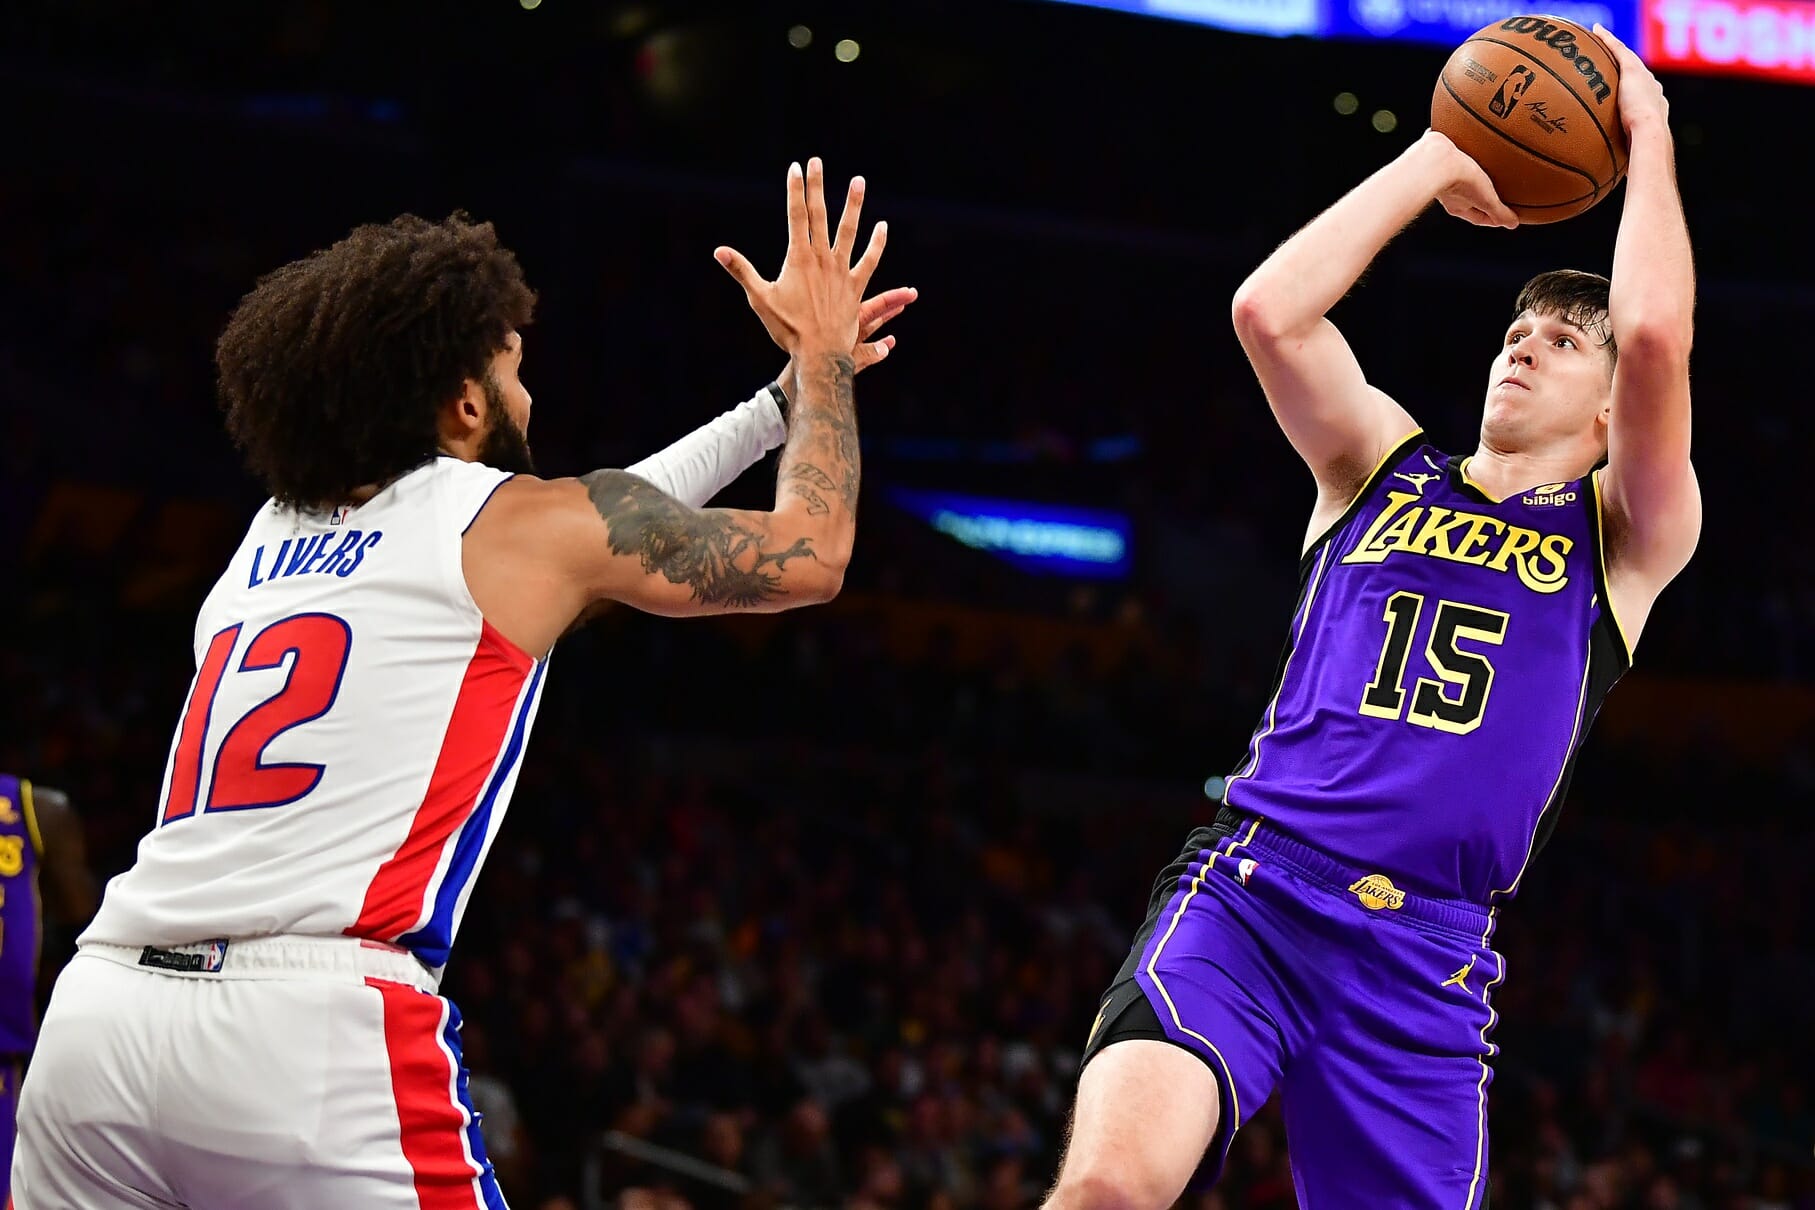 Nov 18, 2022; Los Angeles, California, USA; Los Angeles Lakers guard Austin Reaves (15) shoots against Detroit Pistons forward Isaiah Livers (12) during the second half at Crypto.com Arena. Mandatory Credit: Gary A. Vasquez-USA TODAY Sports (NBA News)